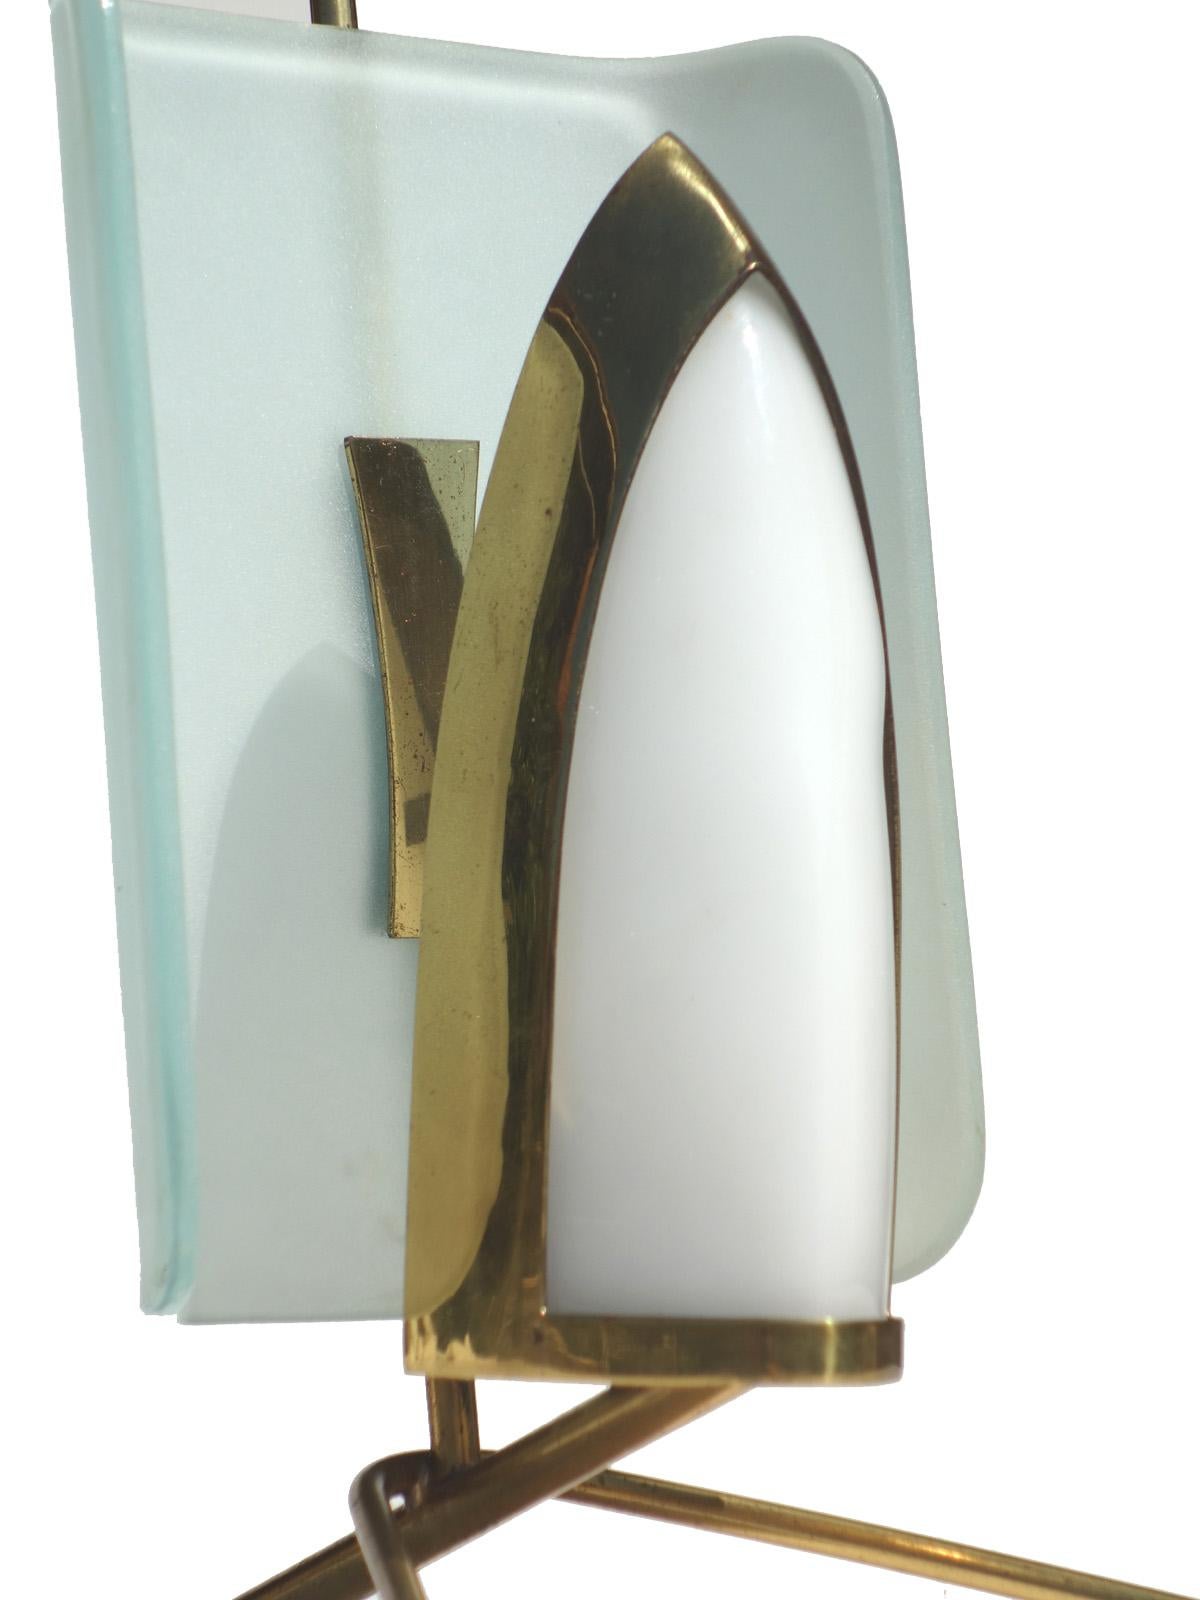 1950s by Arredoluce Italian Design Midcentury Table Lamp In Excellent Condition For Sale In Brescia, IT